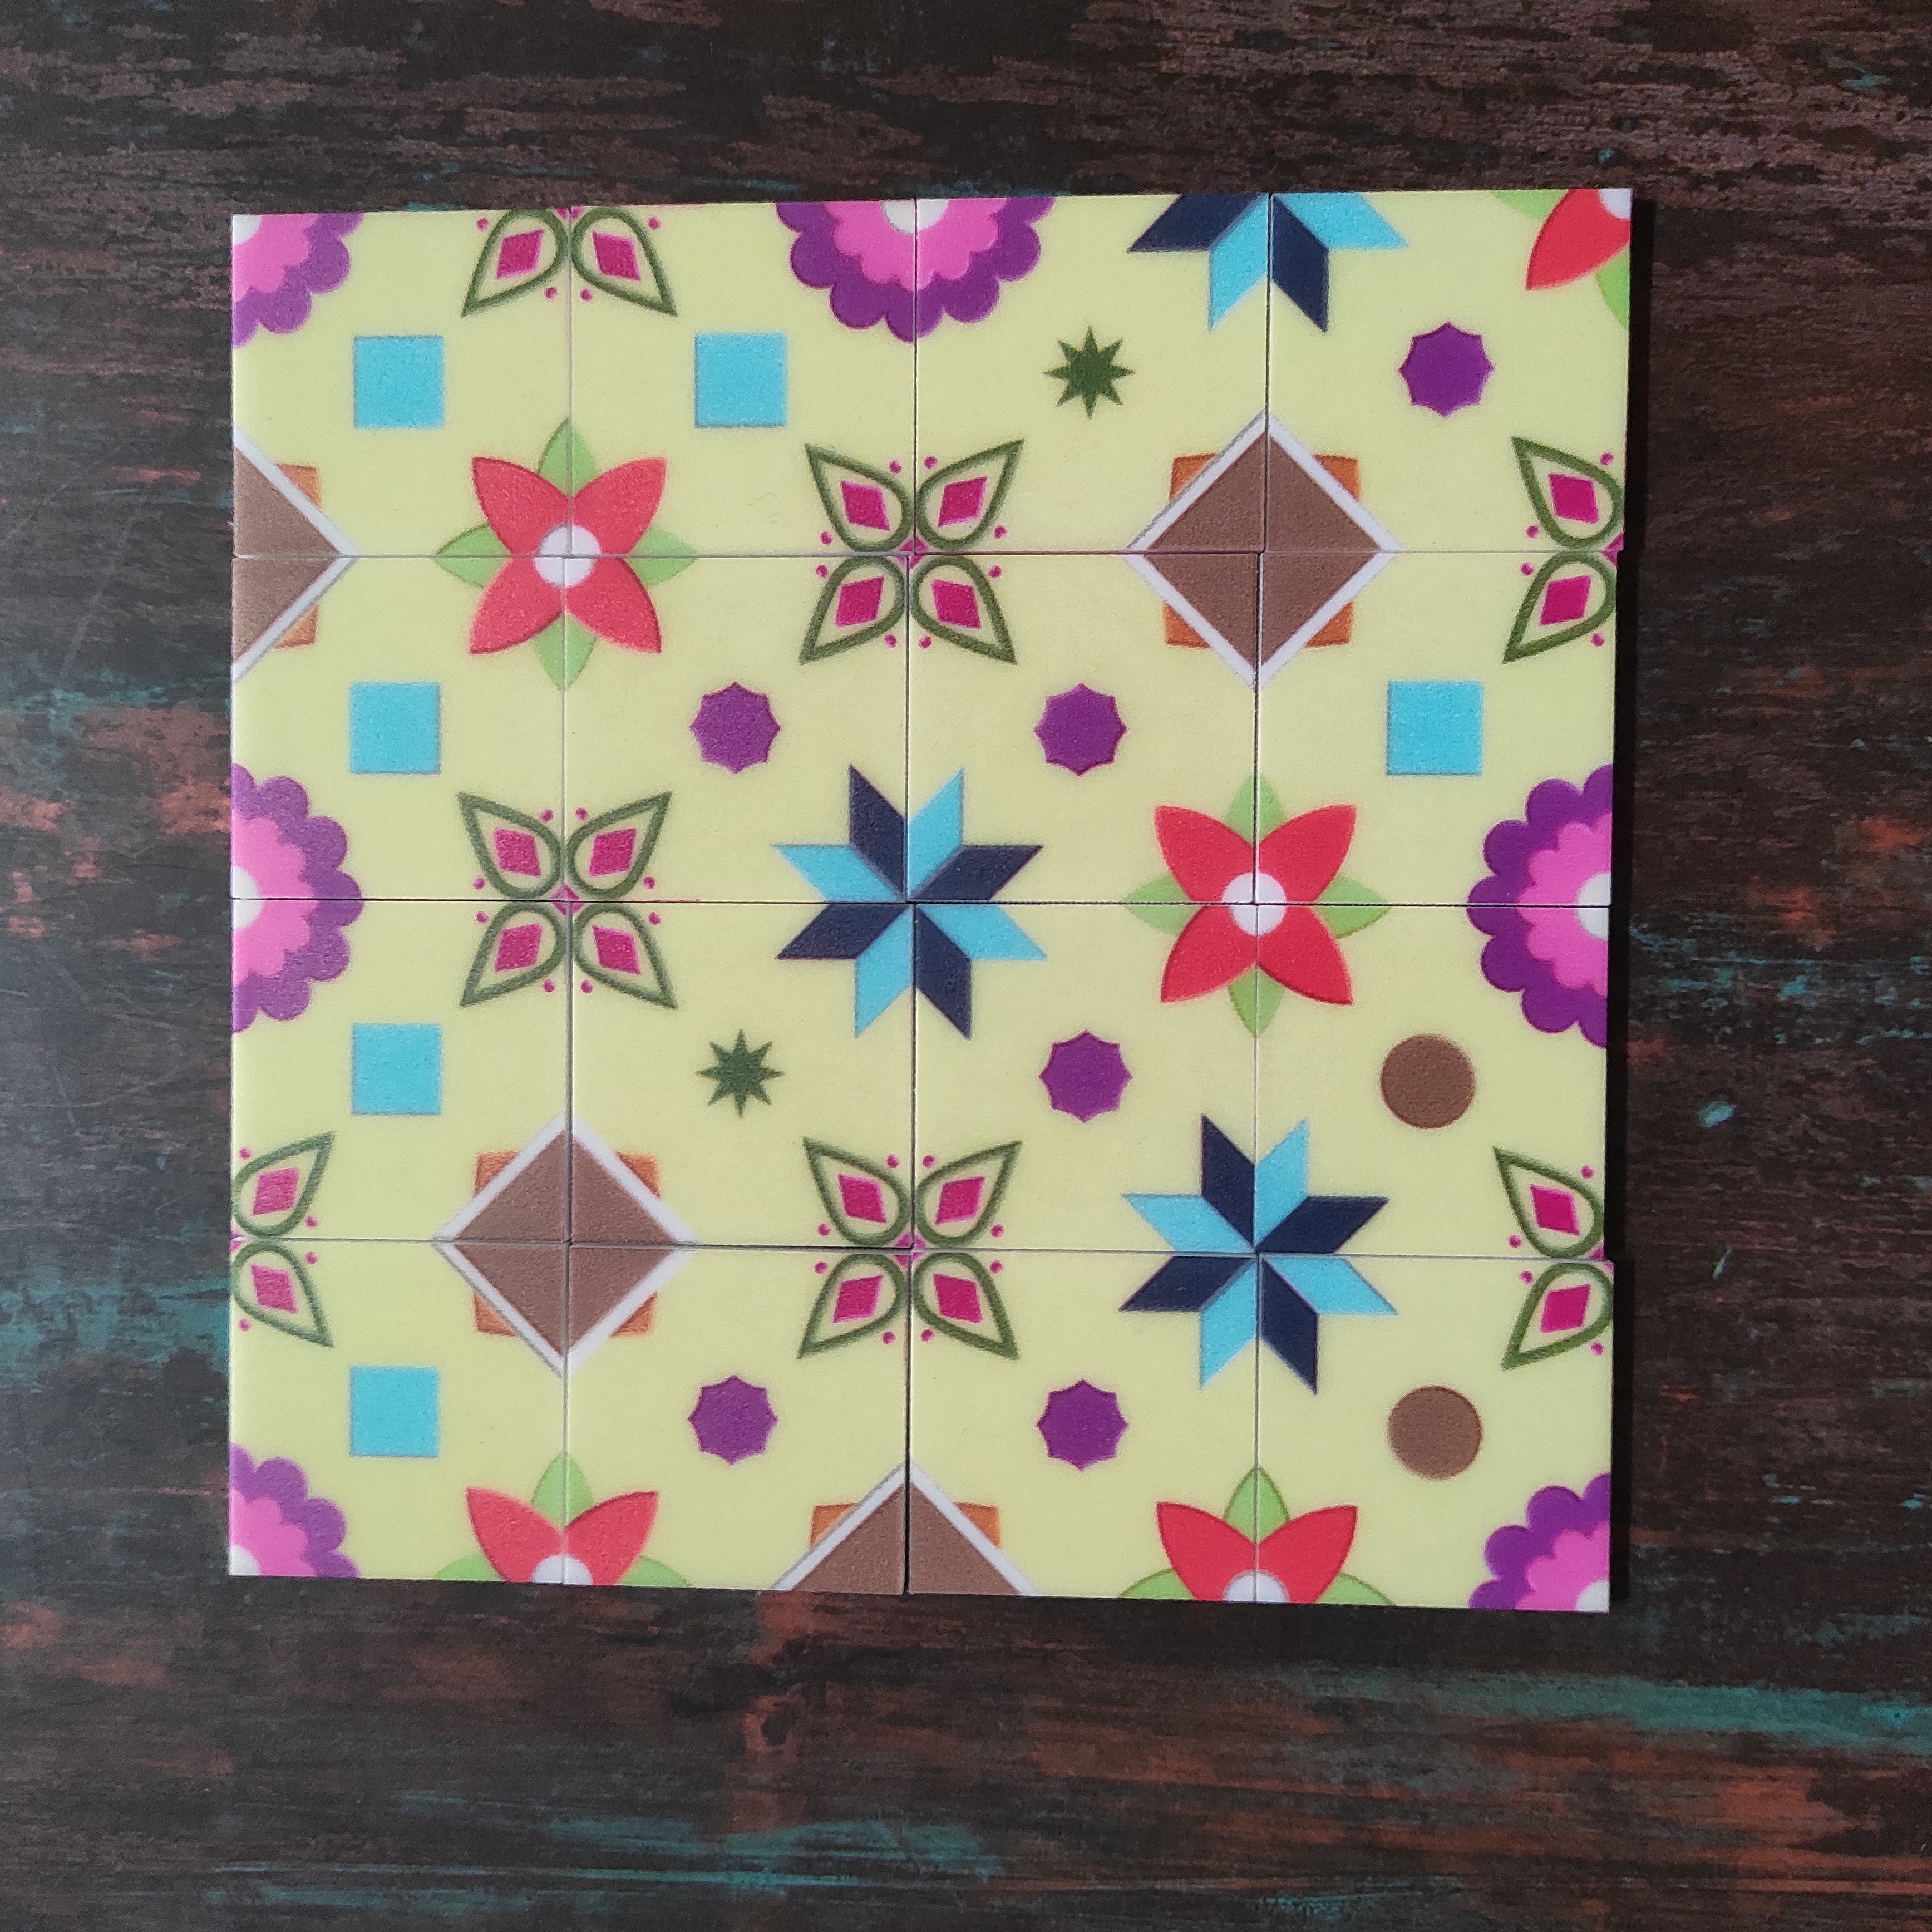 Tiles of the game Athangudi: Artisasn of Chettinad laid out in a 4x4 matrix to form a pleasing pattern. 